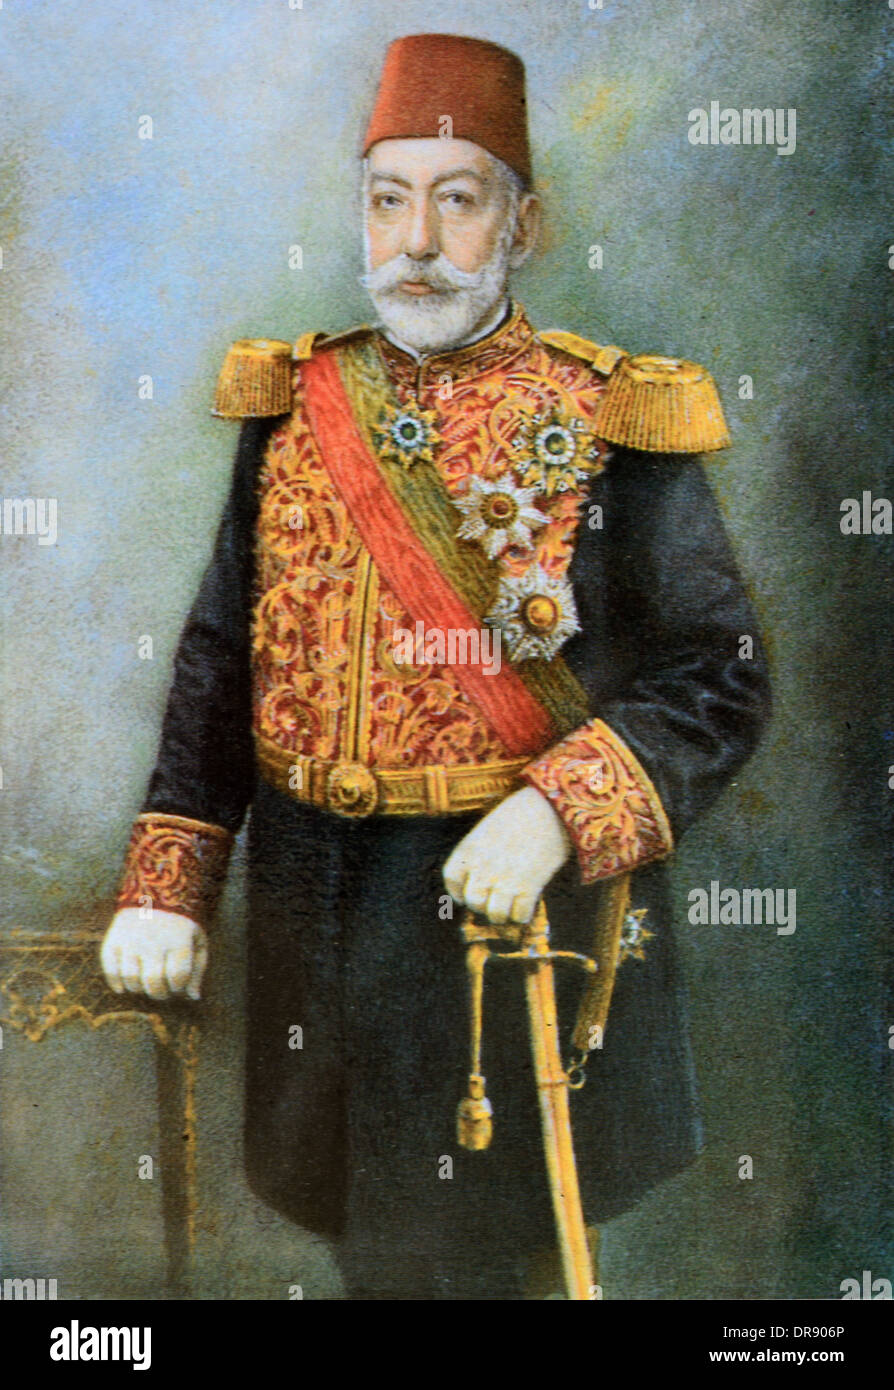 Ottoman Turkish Sultan Mehmed V (1844-1918) or Mehmet V Portrait Painting in Ceremonial Dress and Fez Stock Photo